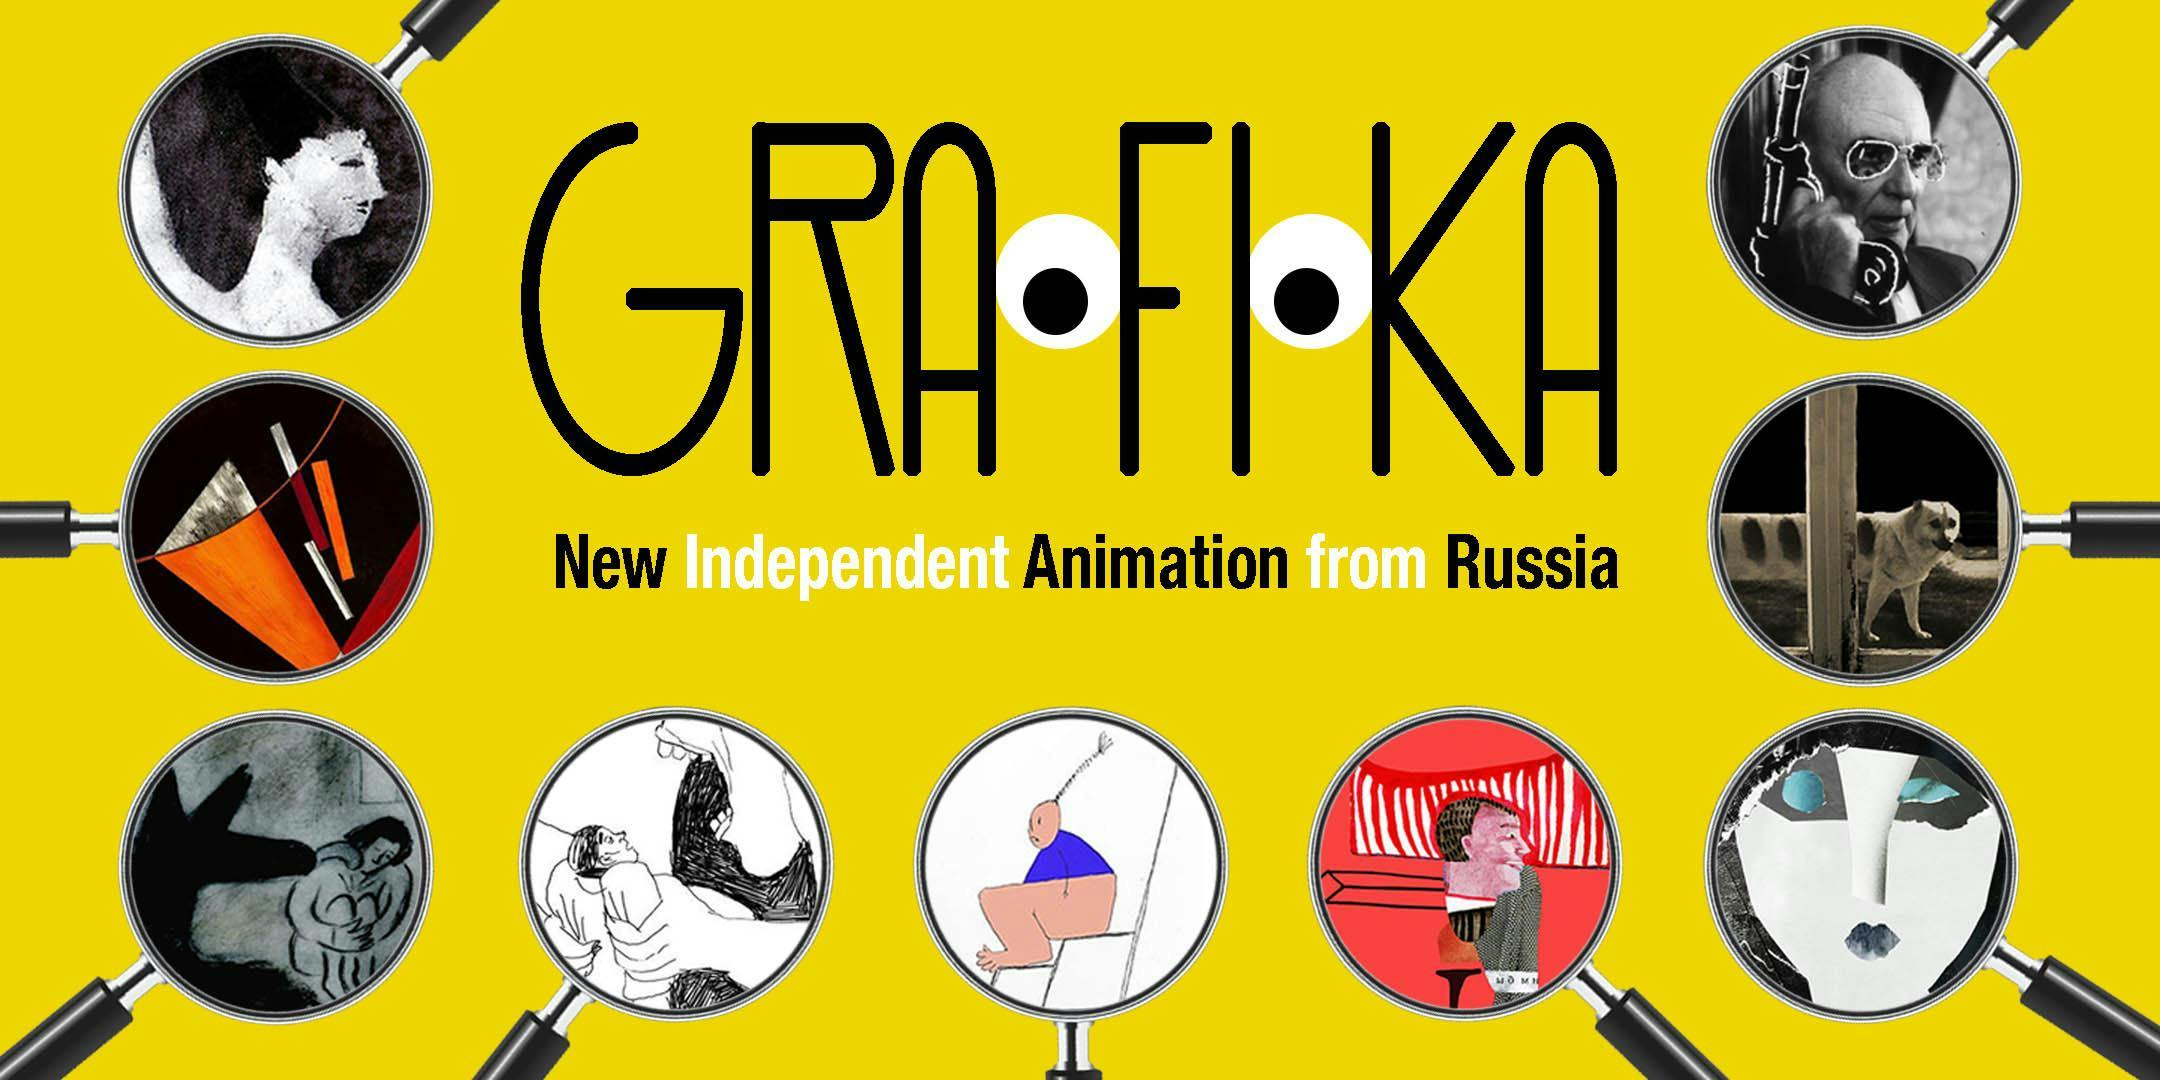 GRA-FI-KA: New Independent Animation from Russia